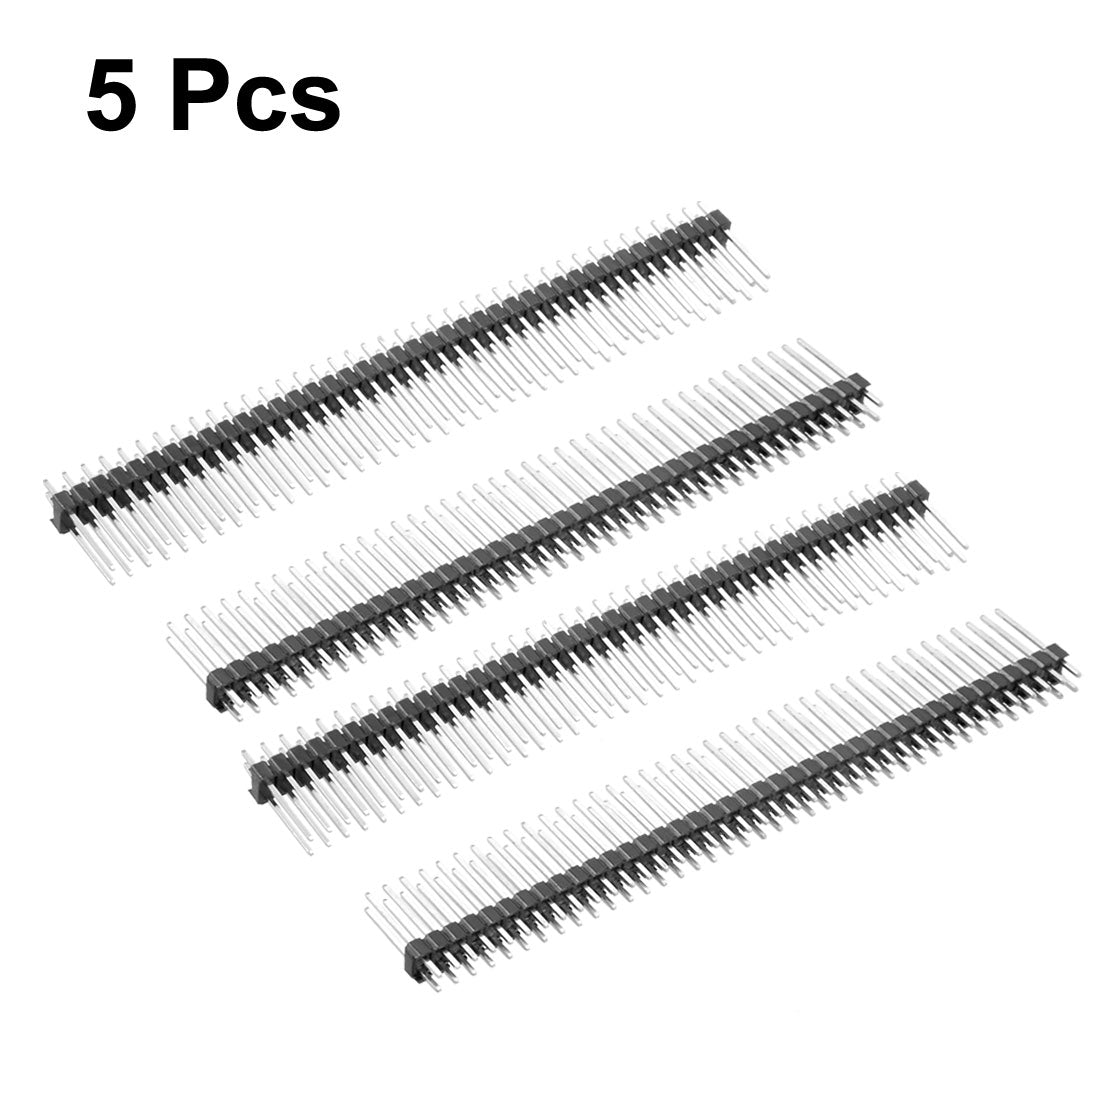 uxcell Uxcell 5Pcs 2.54mm Pitch 40-Pin 19mm Length Double Row Straight Connector Pin Header Strip for Arduino Prototype Shield